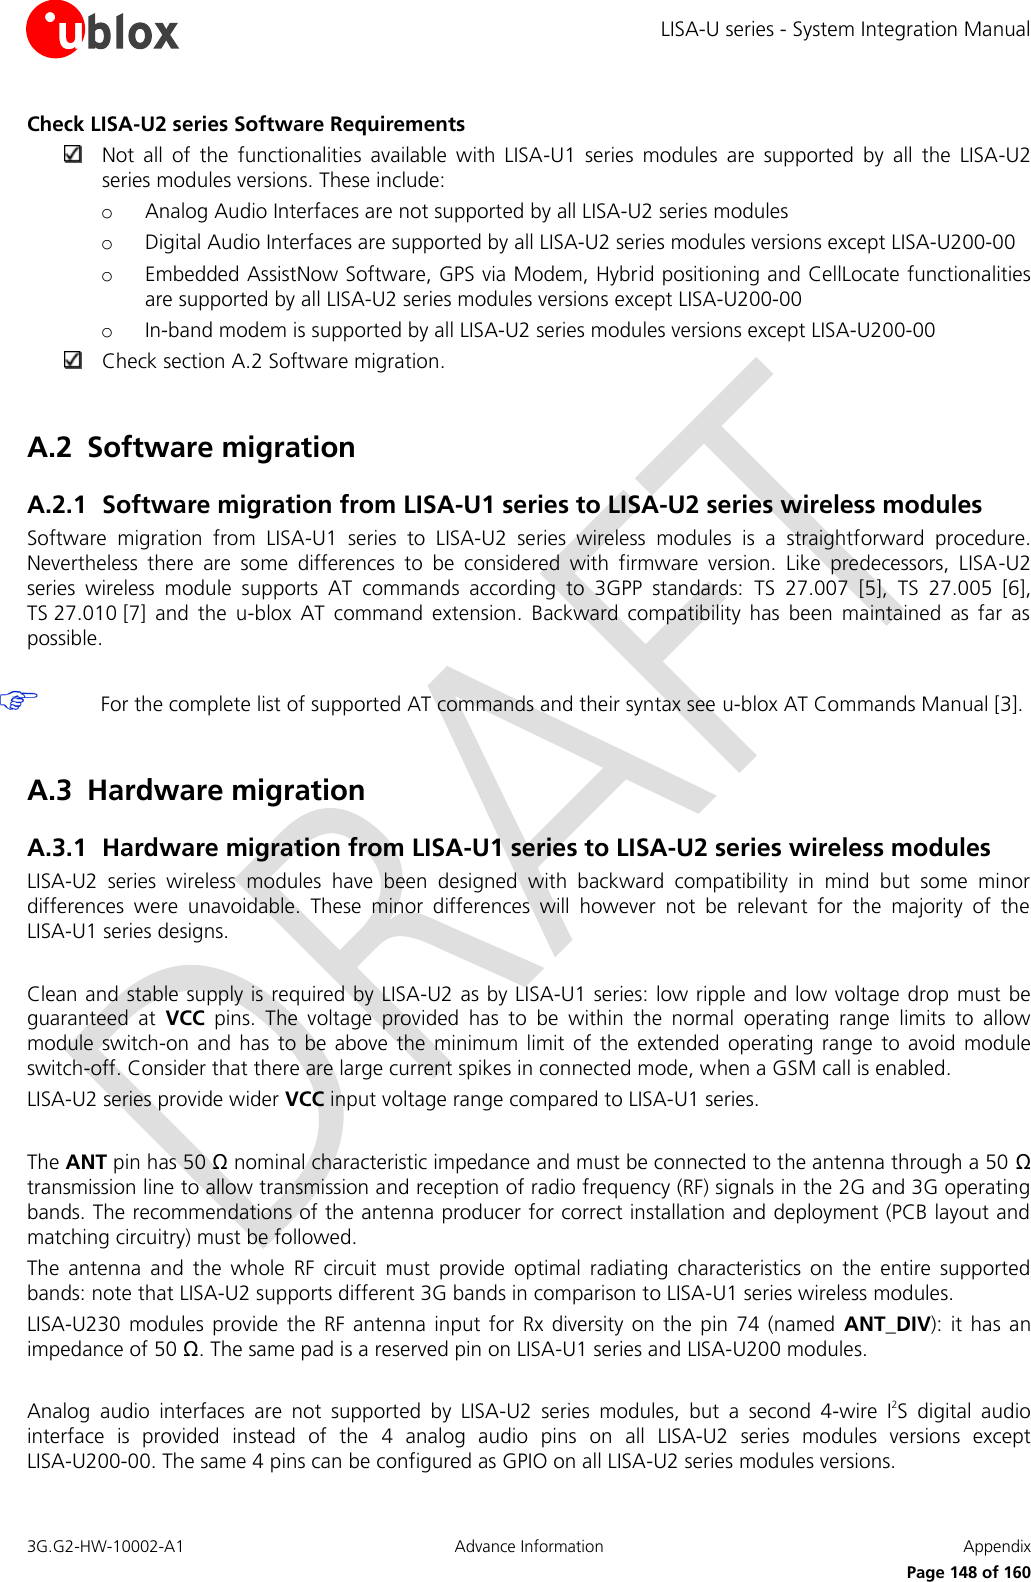 LISA-U series - System Integration Manual 3G.G2-HW-10002-A1  Advance Information  Appendix      Page 148 of 160 Check LISA-U2 series Software Requirements  Not  all  of  the  functionalities  available  with  LISA-U1  series  modules  are  supported  by  all  the  LISA-U2 series modules versions. These include: o Analog Audio Interfaces are not supported by all LISA-U2 series modules o Digital Audio Interfaces are supported by all LISA-U2 series modules versions except LISA-U200-00 o Embedded AssistNow Software, GPS via Modem, Hybrid positioning and CellLocate functionalities are supported by all LISA-U2 series modules versions except LISA-U200-00 o In-band modem is supported by all LISA-U2 series modules versions except LISA-U200-00  Check section A.2 Software migration.  A.2 Software migration A.2.1 Software migration from LISA-U1 series to LISA-U2 series wireless modules Software  migration  from  LISA-U1  series  to  LISA-U2  series  wireless  modules  is  a  straightforward  procedure. Nevertheless  there  are  some  differences  to  be  considered  with  firmware  version.  Like  predecessors,  LISA-U2 series  wireless  module  supports  AT  commands  according  to  3GPP  standards:  TS  27.007 [5],  TS 27.005 [6], TS 27.010 [7]  and  the  u-blox  AT  command  extension.  Backward  compatibility  has  been  maintained  as  far  as possible.   For the complete list of supported AT commands and their syntax see u-blox AT Commands Manual [3].  A.3 Hardware migration A.3.1 Hardware migration from LISA-U1 series to LISA-U2 series wireless modules LISA-U2  series  wireless  modules  have  been  designed  with  backward  compatibility  in  mind  but  some  minor differences  were  unavoidable.  These  minor  differences  will  however  not  be  relevant  for  the  majority  of  the LISA-U1 series designs.  Clean and stable supply is required by LISA-U2 as by LISA-U1 series: low ripple and low voltage drop must be guaranteed  at  VCC  pins.  The  voltage  provided  has  to  be  within  the  normal  operating  range  limits  to  allow module switch-on  and has  to be  above  the  minimum limit  of the  extended  operating  range  to avoid  module switch-off. Consider that there are large current spikes in connected mode, when a GSM call is enabled. LISA-U2 series provide wider VCC input voltage range compared to LISA-U1 series.  The ANT pin has 50 Ω nominal characteristic impedance and must be connected to the antenna through a 50 Ω transmission line to allow transmission and reception of radio frequency (RF) signals in the 2G and 3G operating bands. The recommendations of the antenna producer for correct installation and deployment (PCB layout and matching circuitry) must be followed. The  antenna  and  the  whole  RF  circuit  must  provide  optimal  radiating  characteristics  on  the  entire  supported bands: note that LISA-U2 supports different 3G bands in comparison to LISA-U1 series wireless modules. LISA-U230  modules provide  the RF  antenna  input for  Rx diversity on  the pin  74 (named  ANT_DIV):  it has  an impedance of 50 Ω. The same pad is a reserved pin on LISA-U1 series and LISA-U200 modules.  Analog  audio  interfaces  are  not  supported  by  LISA-U2  series  modules,  but  a  second  4-wire  I2S  digital  audio interface  is  provided  instead  of  the  4  analog  audio  pins  on  all  LISA-U2  series  modules  versions  except LISA-U200-00. The same 4 pins can be configured as GPIO on all LISA-U2 series modules versions. 